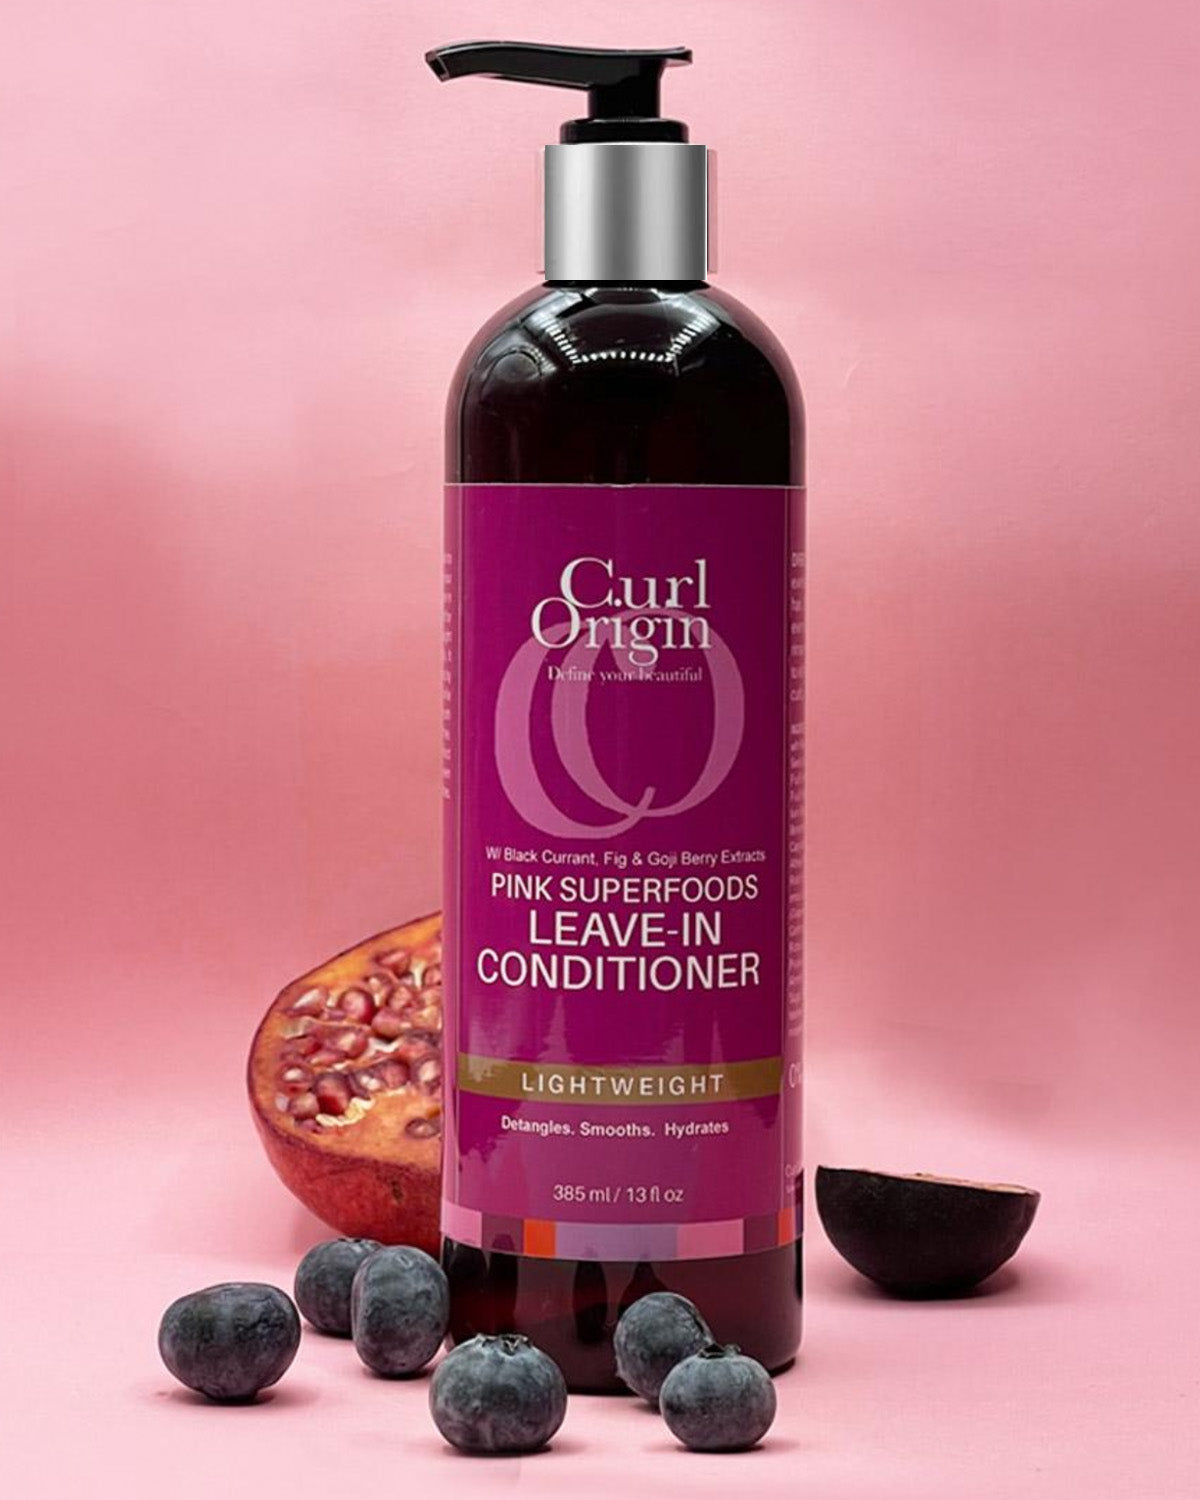 pink superfoods leave-in conditioner